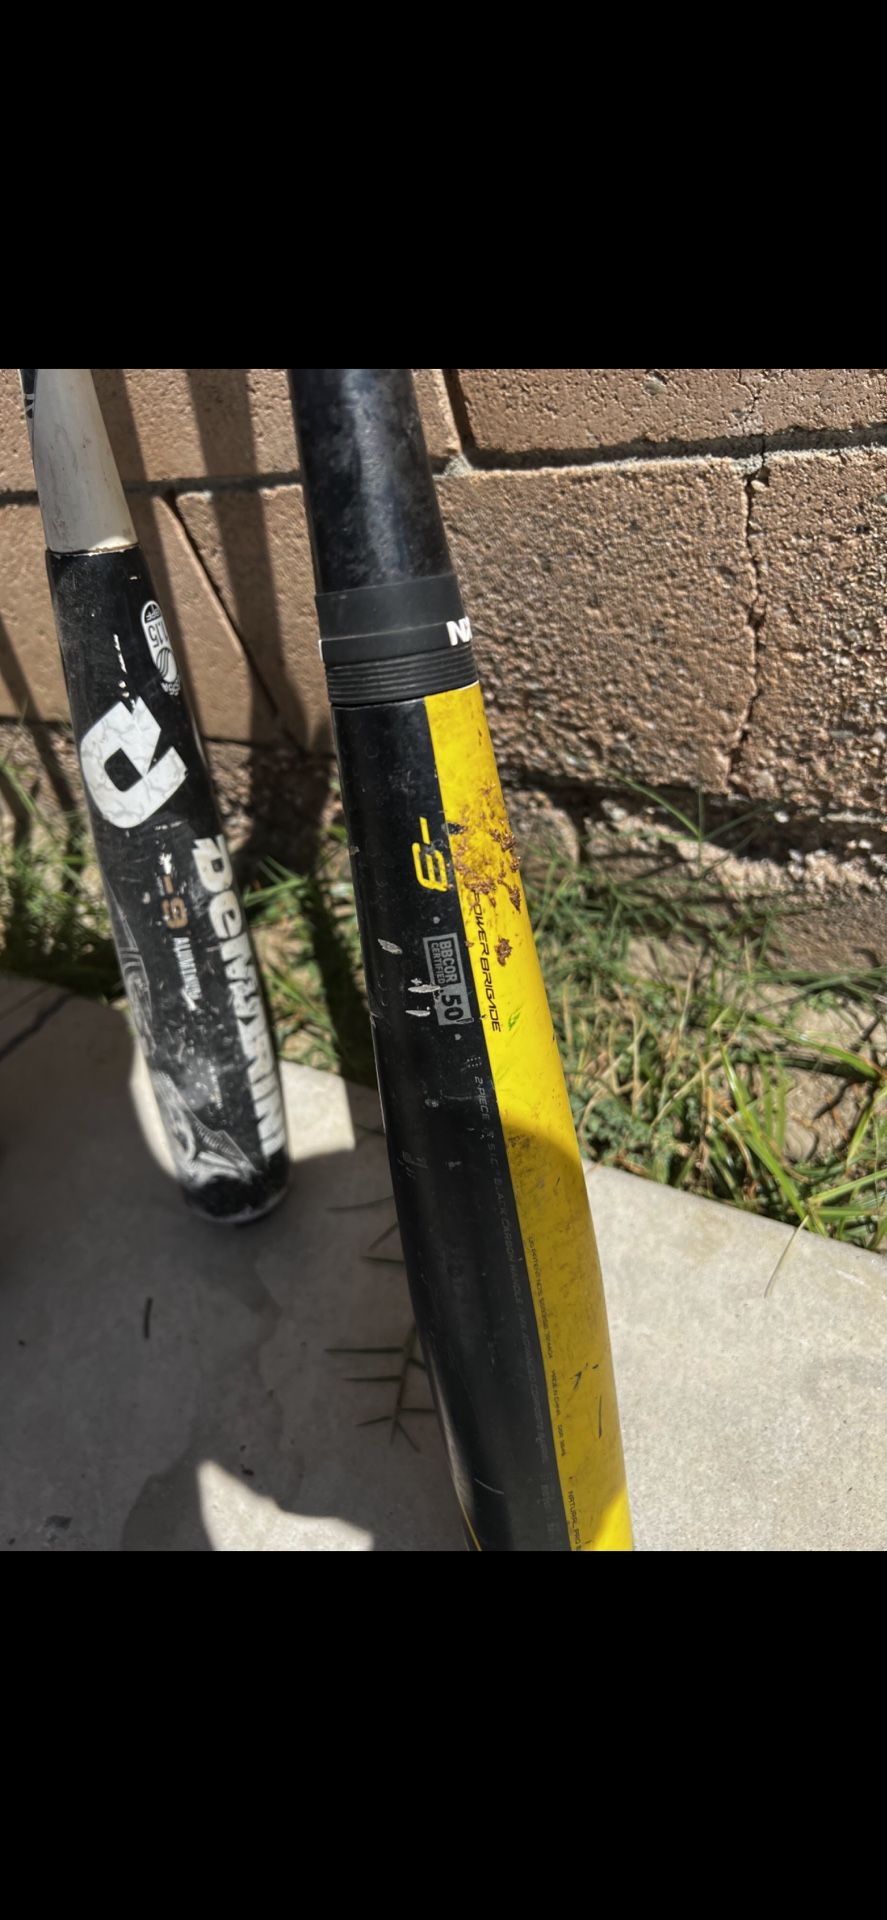 32” Inch Easton S1 Baseball Bat for Sale in Lakewood, CA - OfferUp